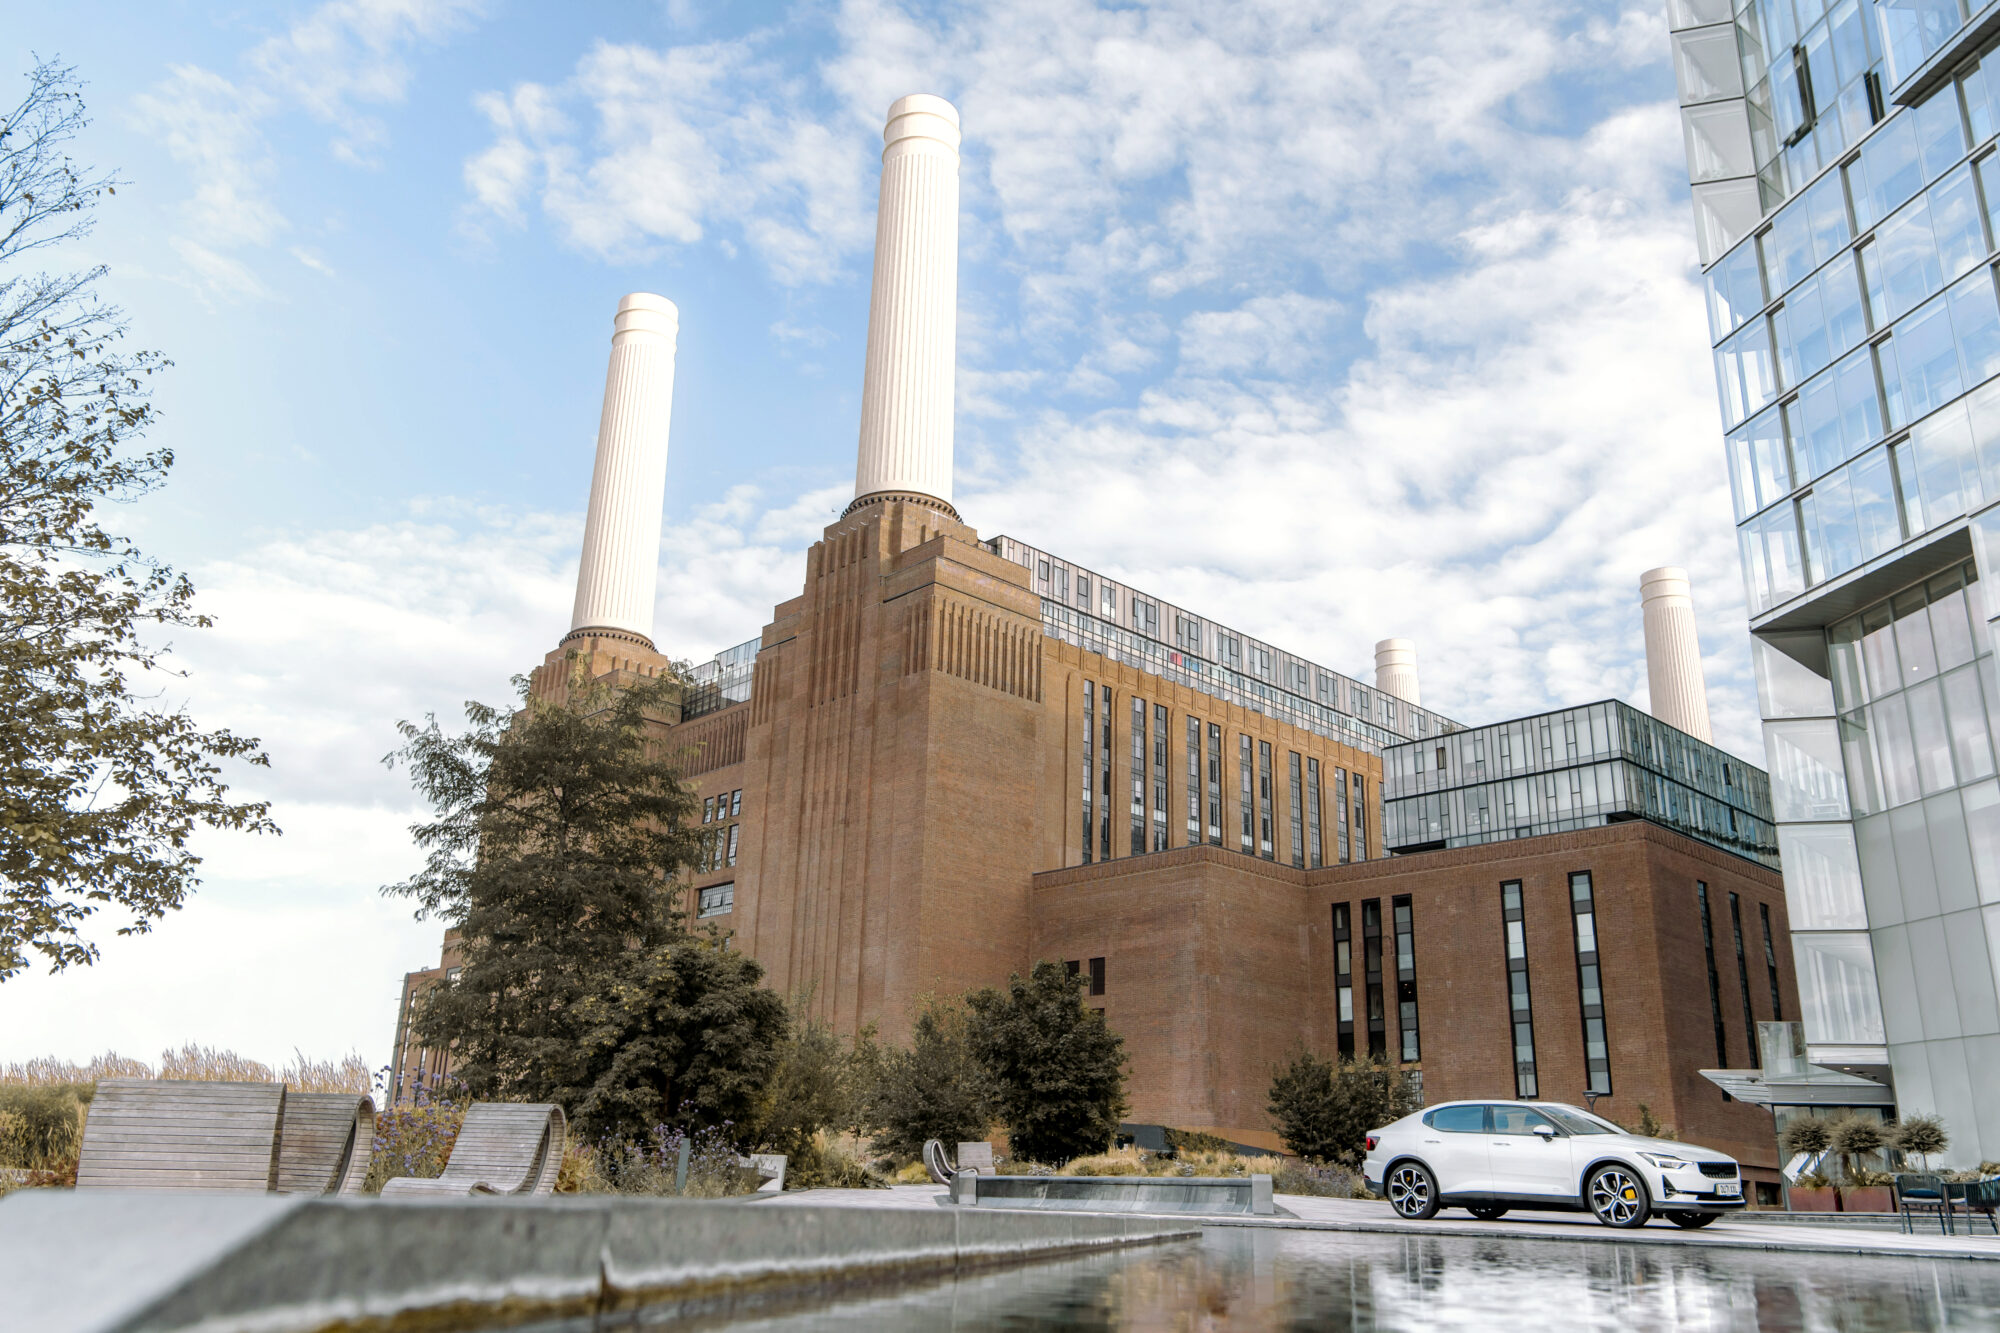 Battersea Power Station Opens Doors to the Public for the First Time